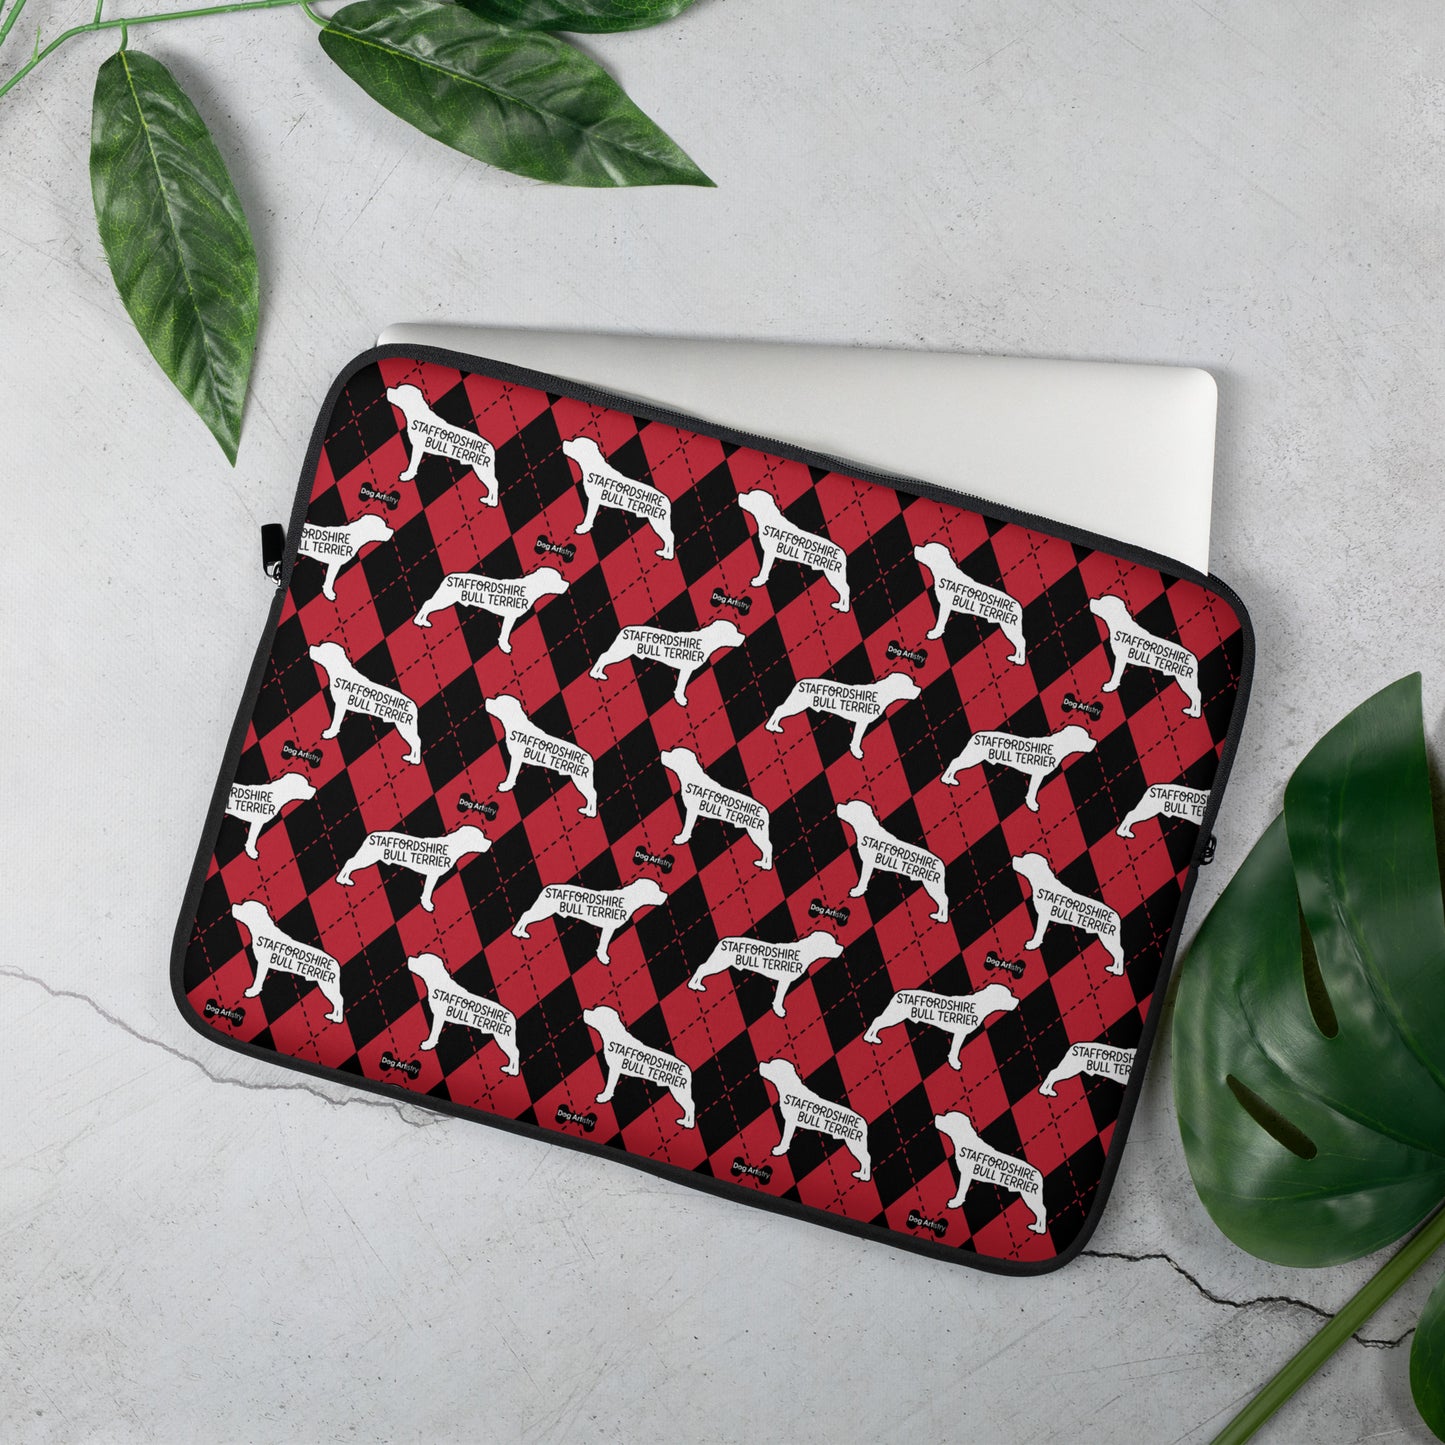 Staffordshire Bull Terrier red and black argyle laptop sleeve by Dog Artistry